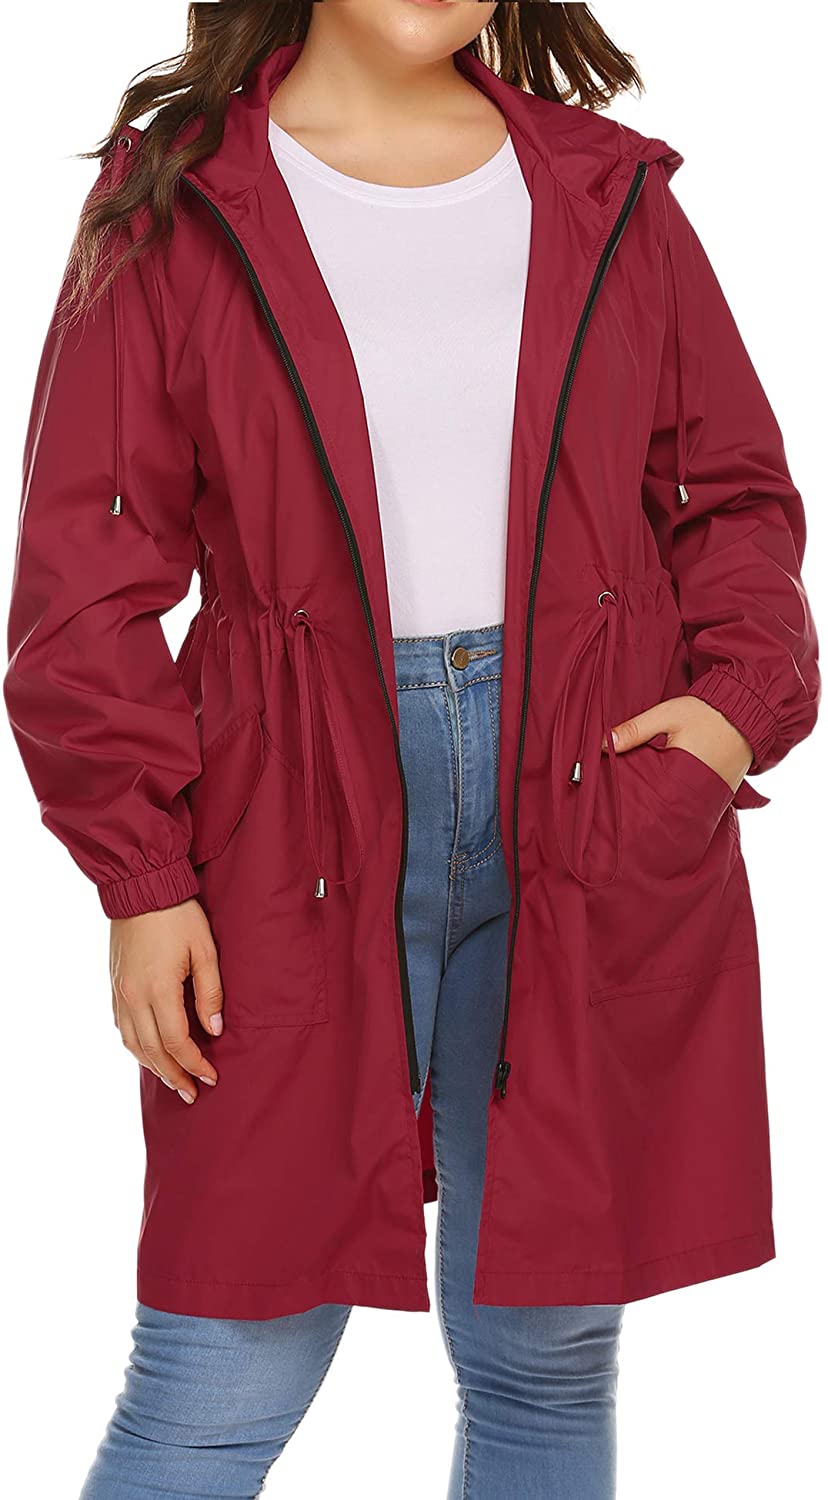 Involand Womens Plus Size Light Weight Hooded Trench Coat Jacket with Belt 